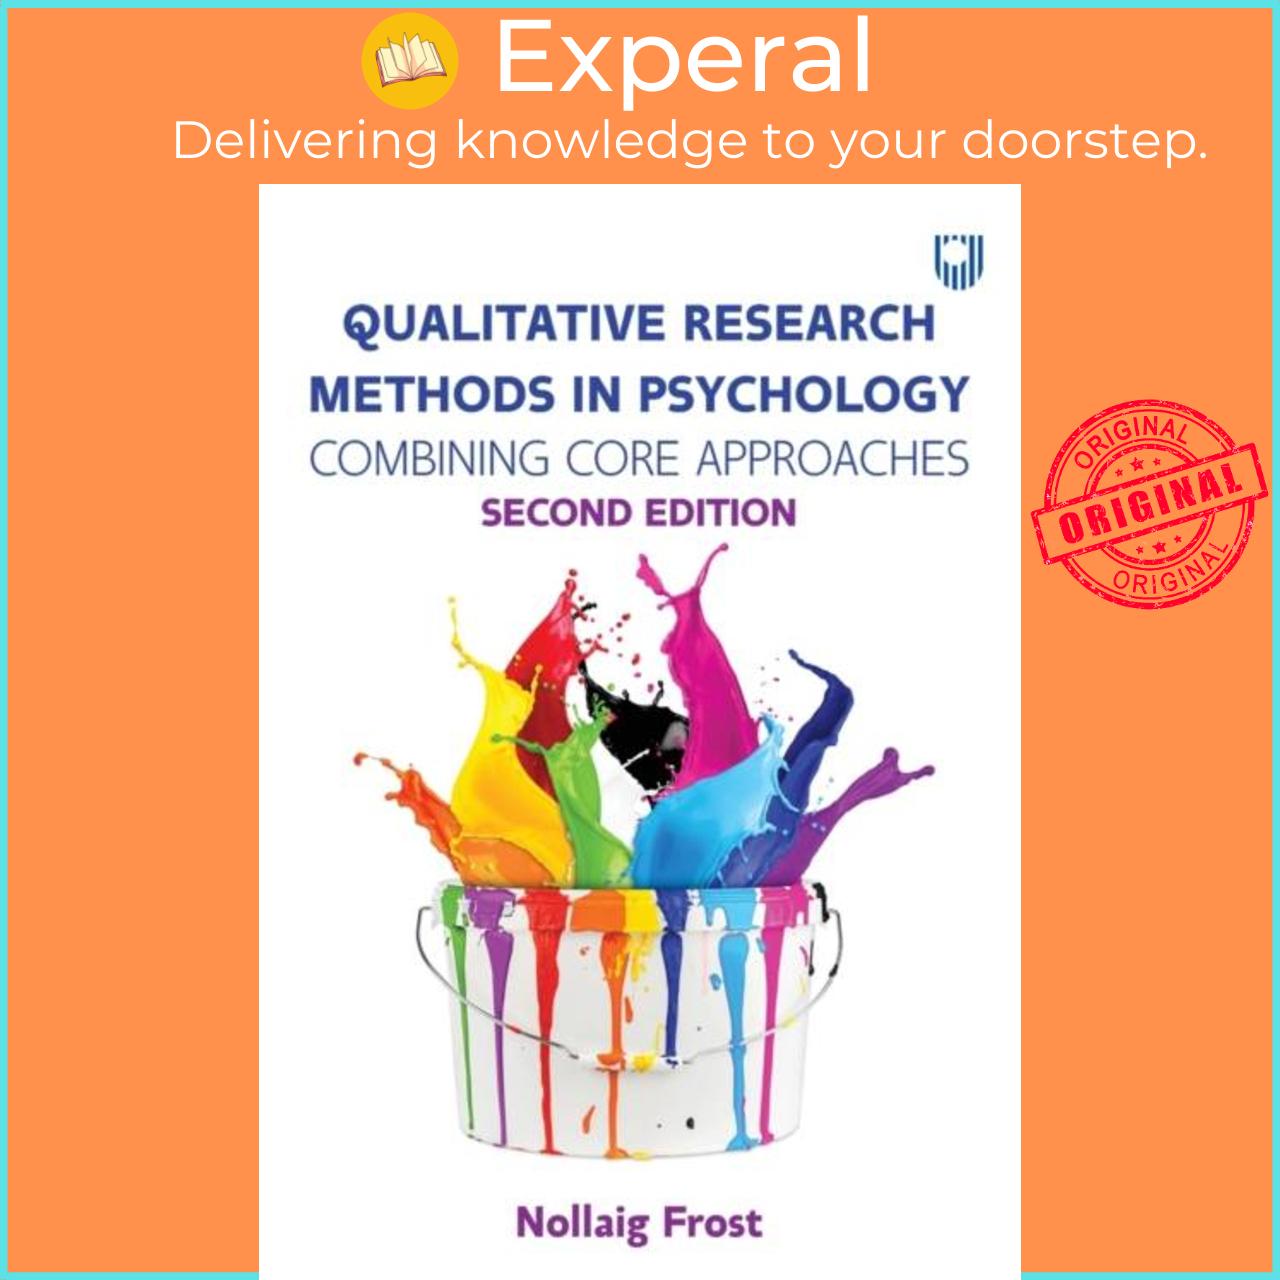 Sách - Qualitative Research Methods in Psychology: Combining Core Approaches 2e by Nollaig Frost (UK edition, paperback)